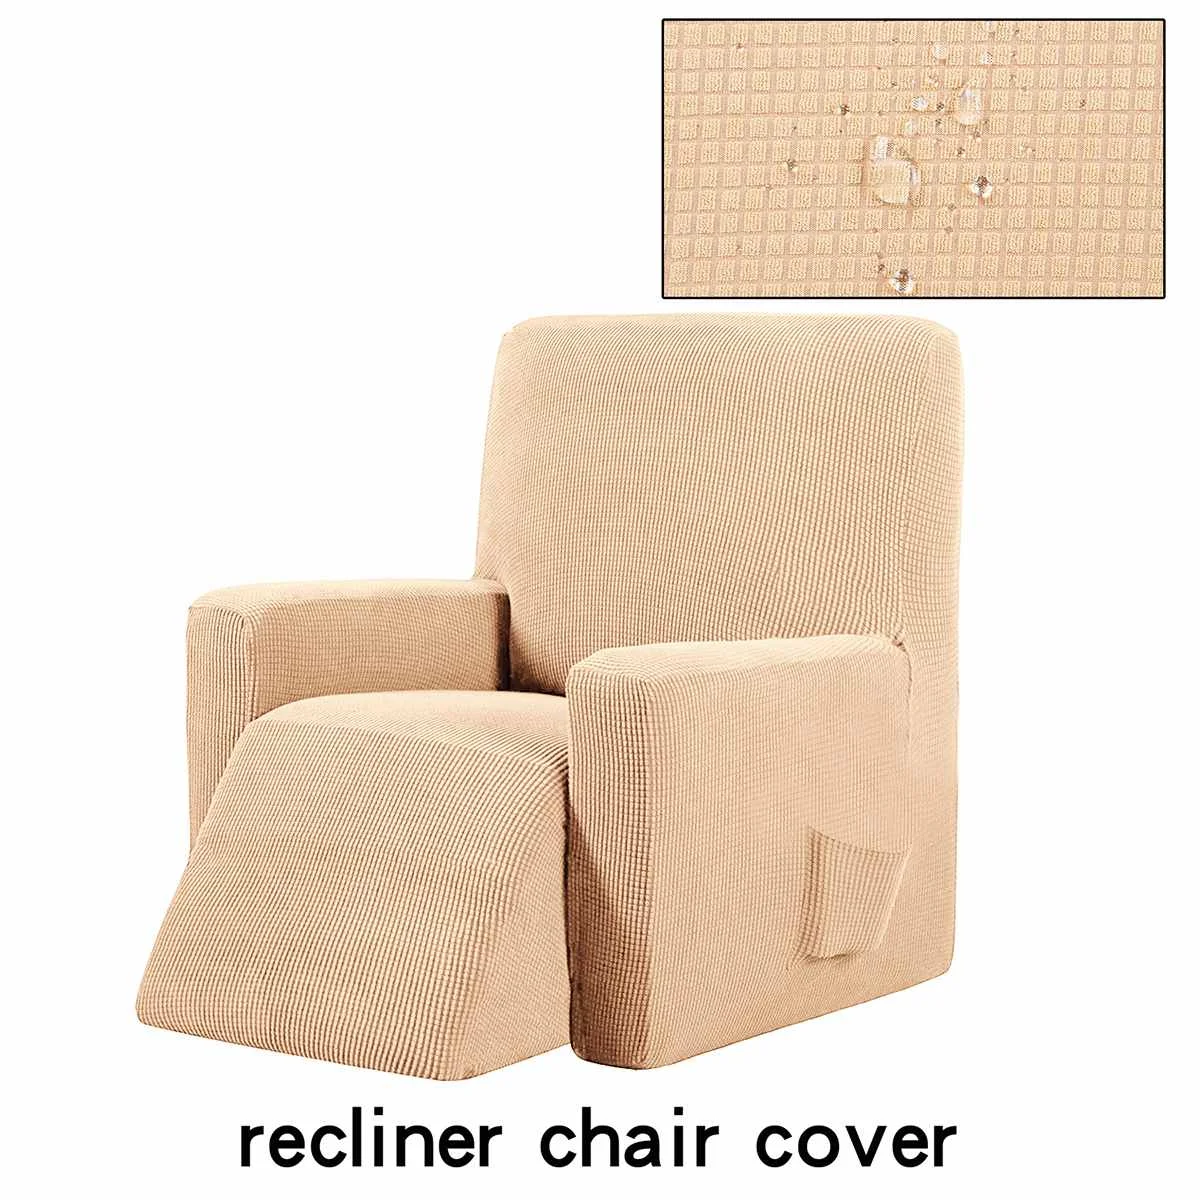 Recliner Couch Cover All-inclusive Sofa Cover Elasticity Stretch Anti-slip Furniture Slipcovers Chair Protector Single Seat Sofa - Цвет: Dark beige